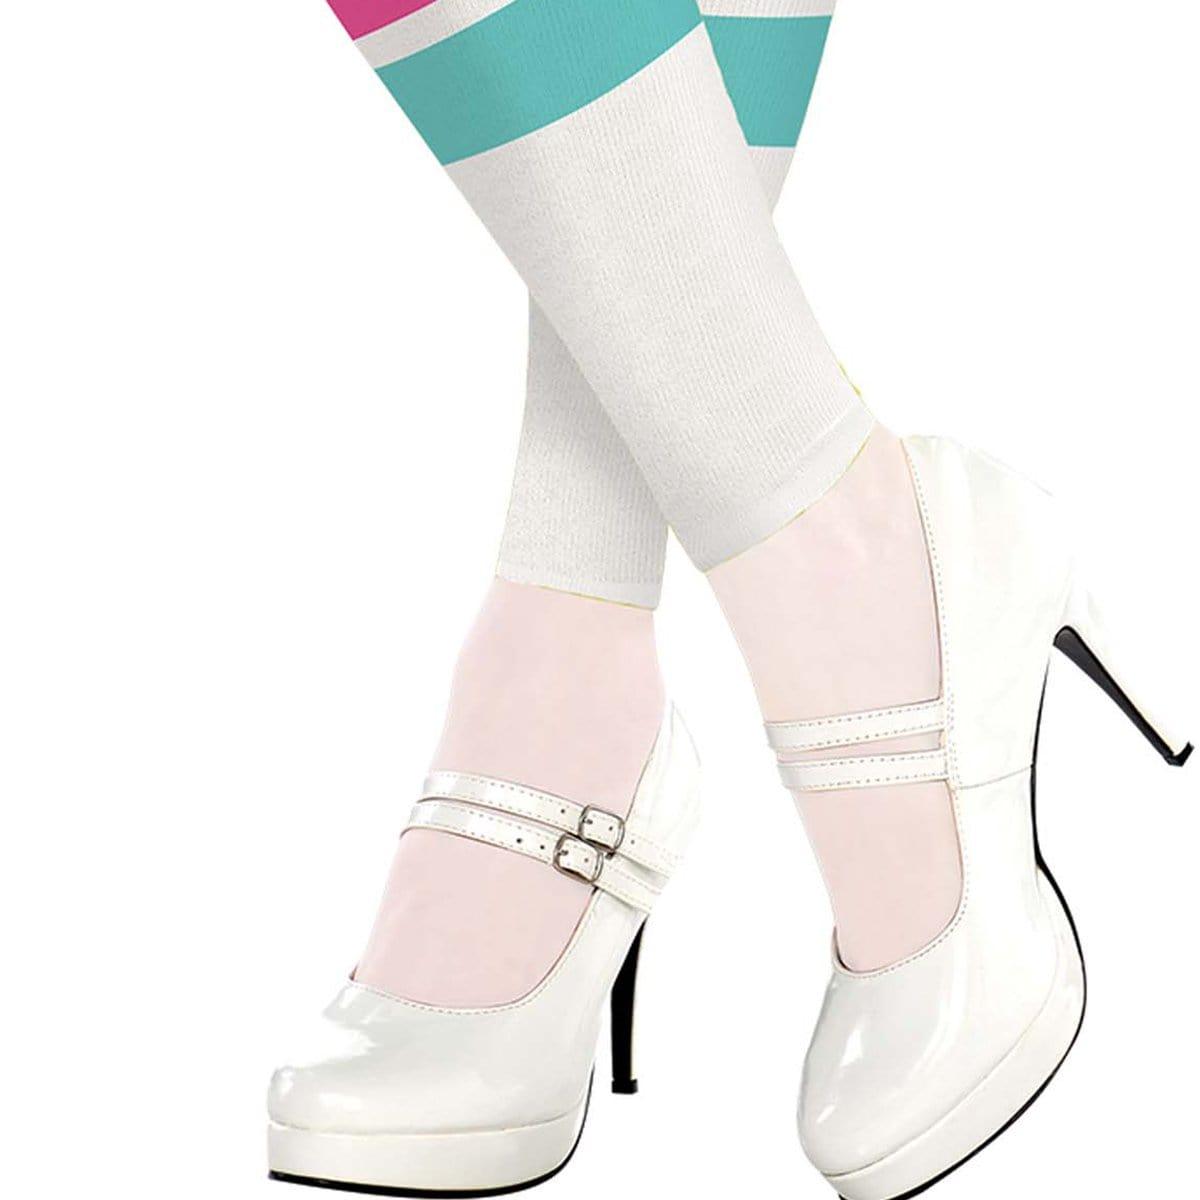 Awesome Party Leg Warmers for Adults